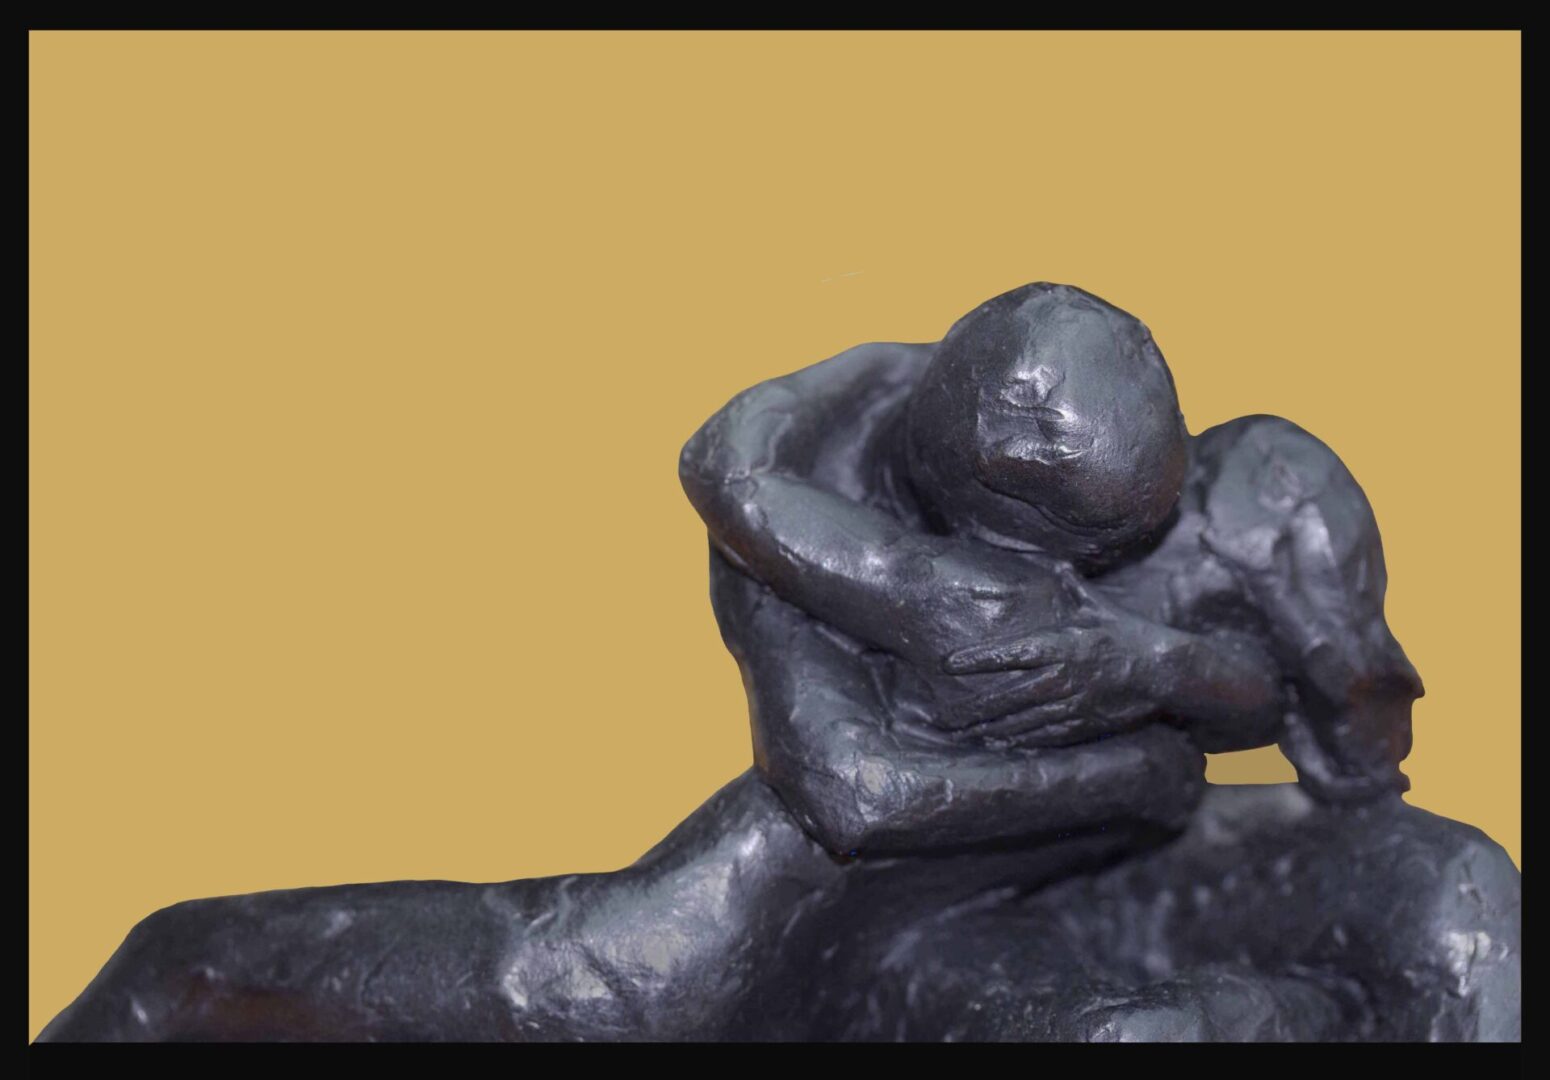 A sculpture of two people sitting on top of each other.